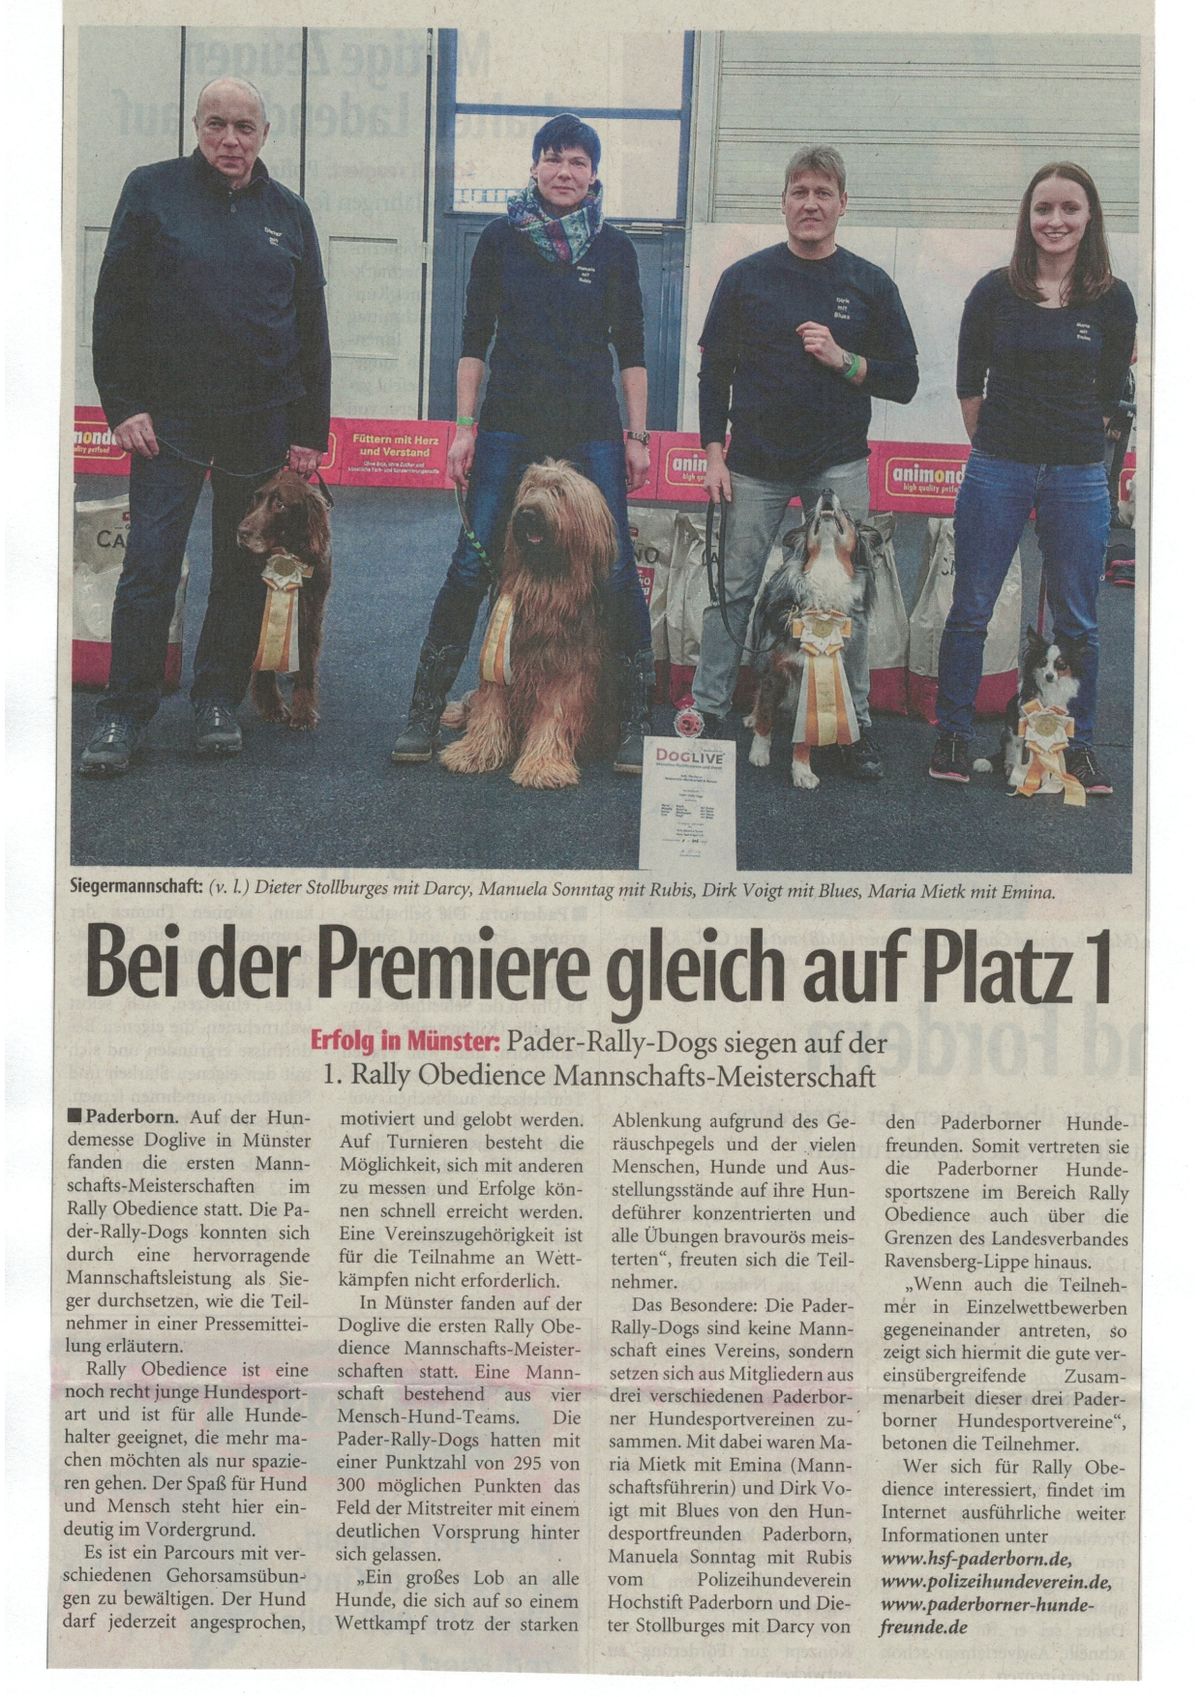 Pader-Rally-Dogs ROMM Münster - NW 22.01.16